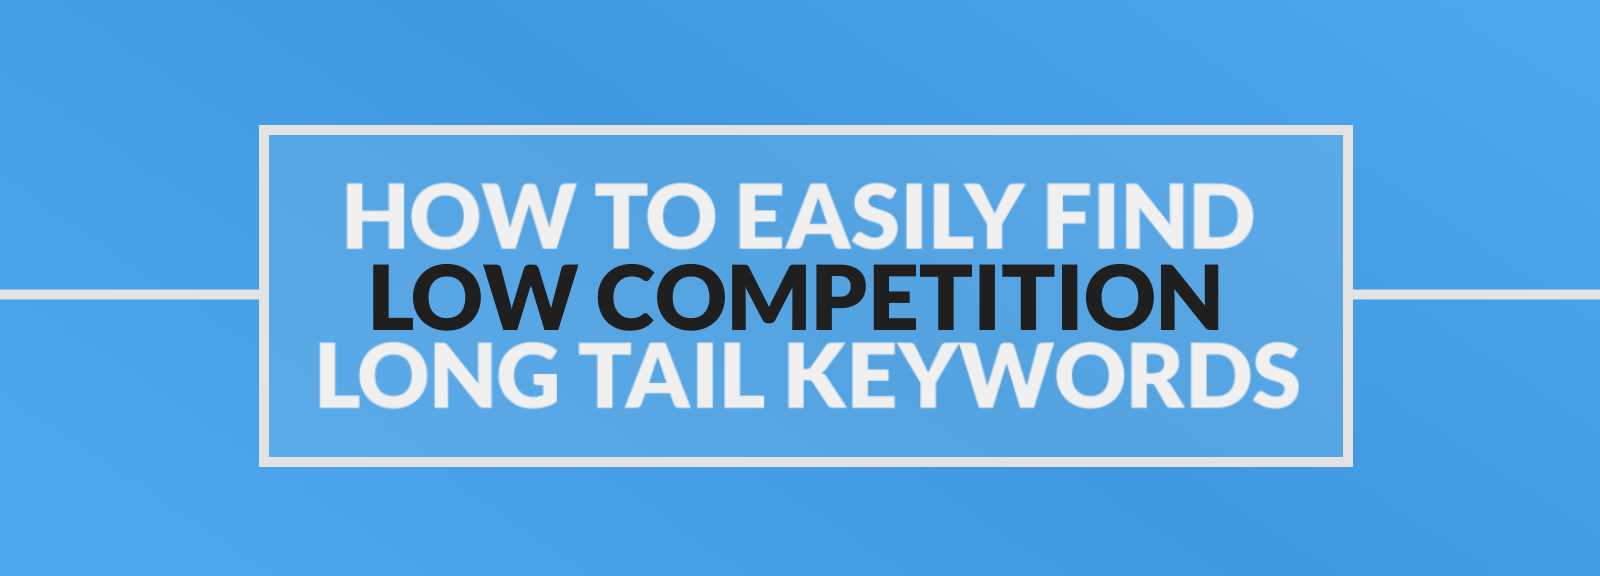 how to easily find low competition long tail keywords